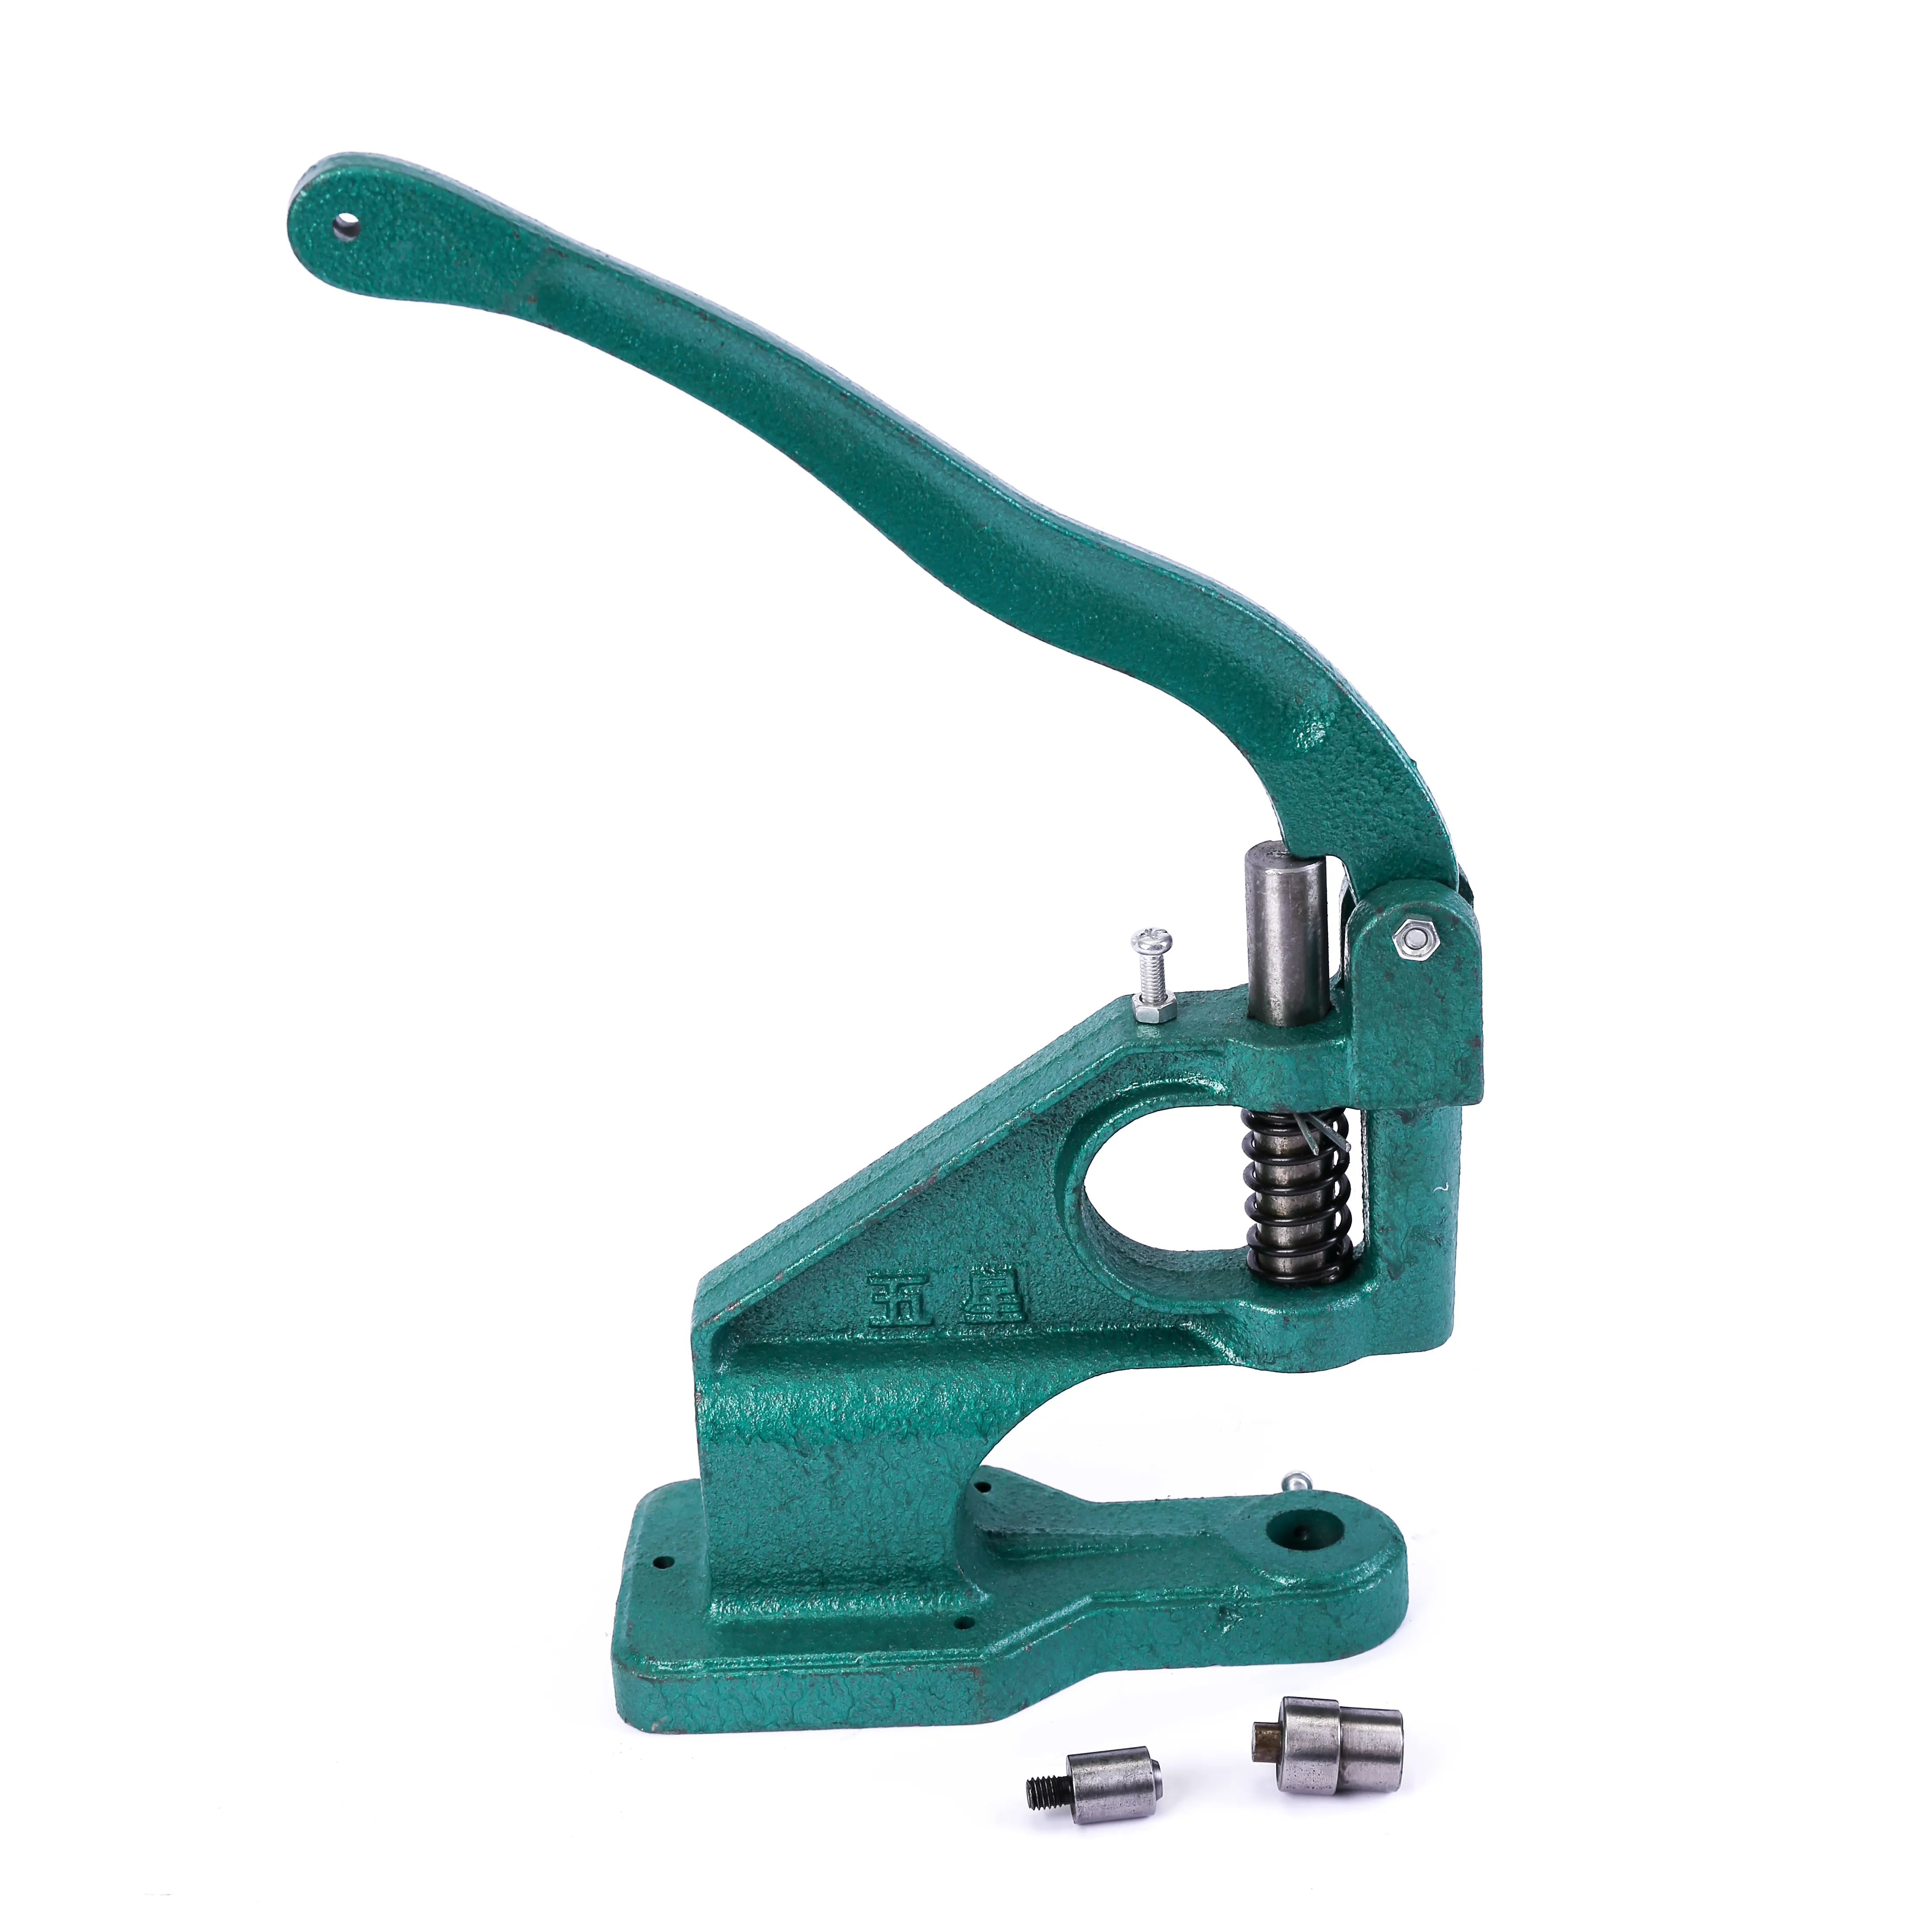 hand press machine hand press buckle machine chicken eye buckle four in one buckle rivet and air hole installation tool